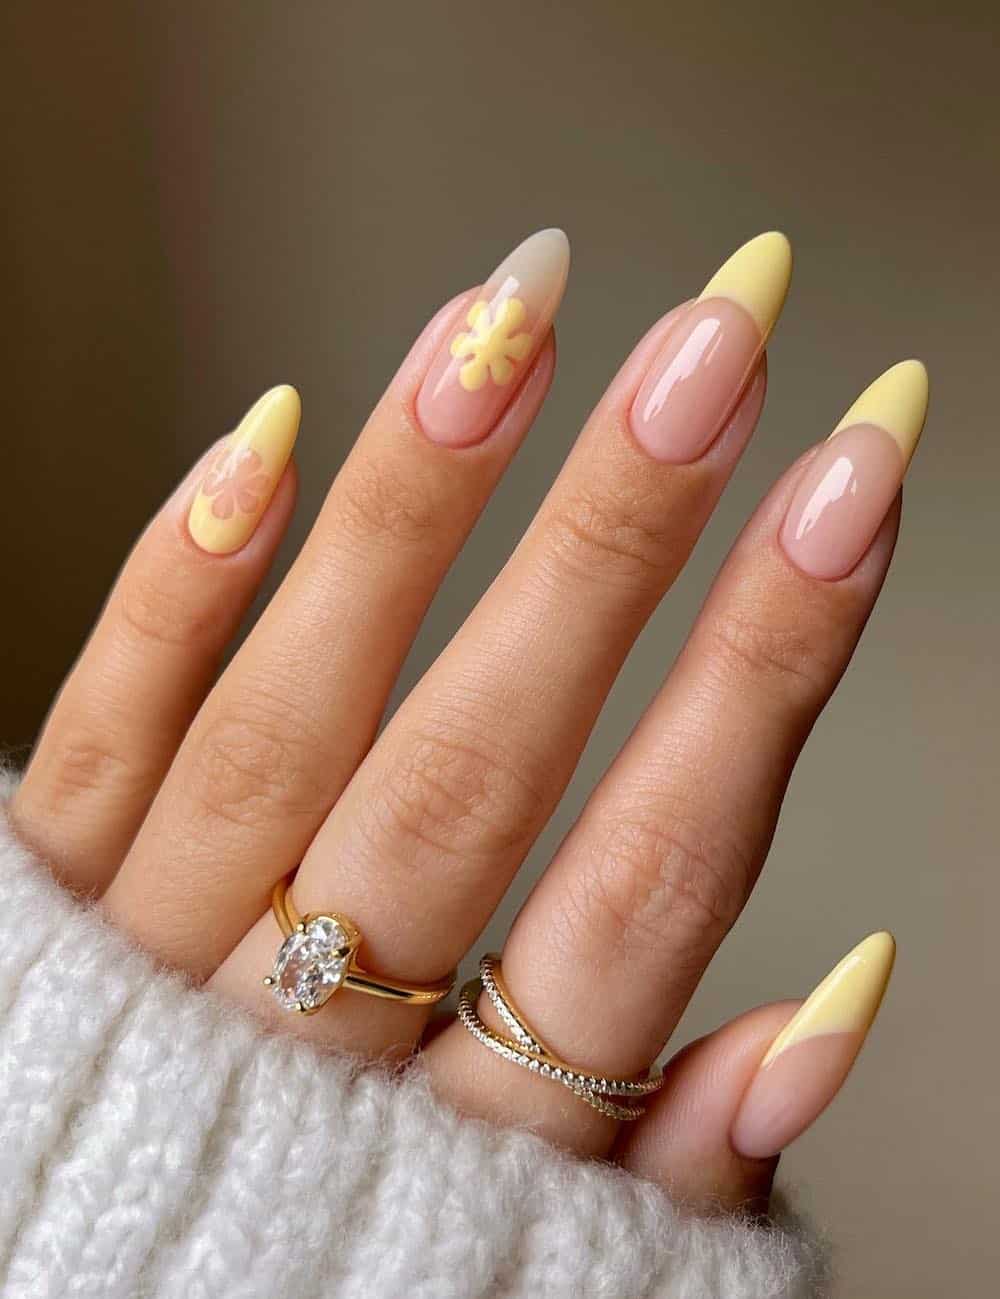 long nude almond nails with butter yellow french tips and floral accent nails